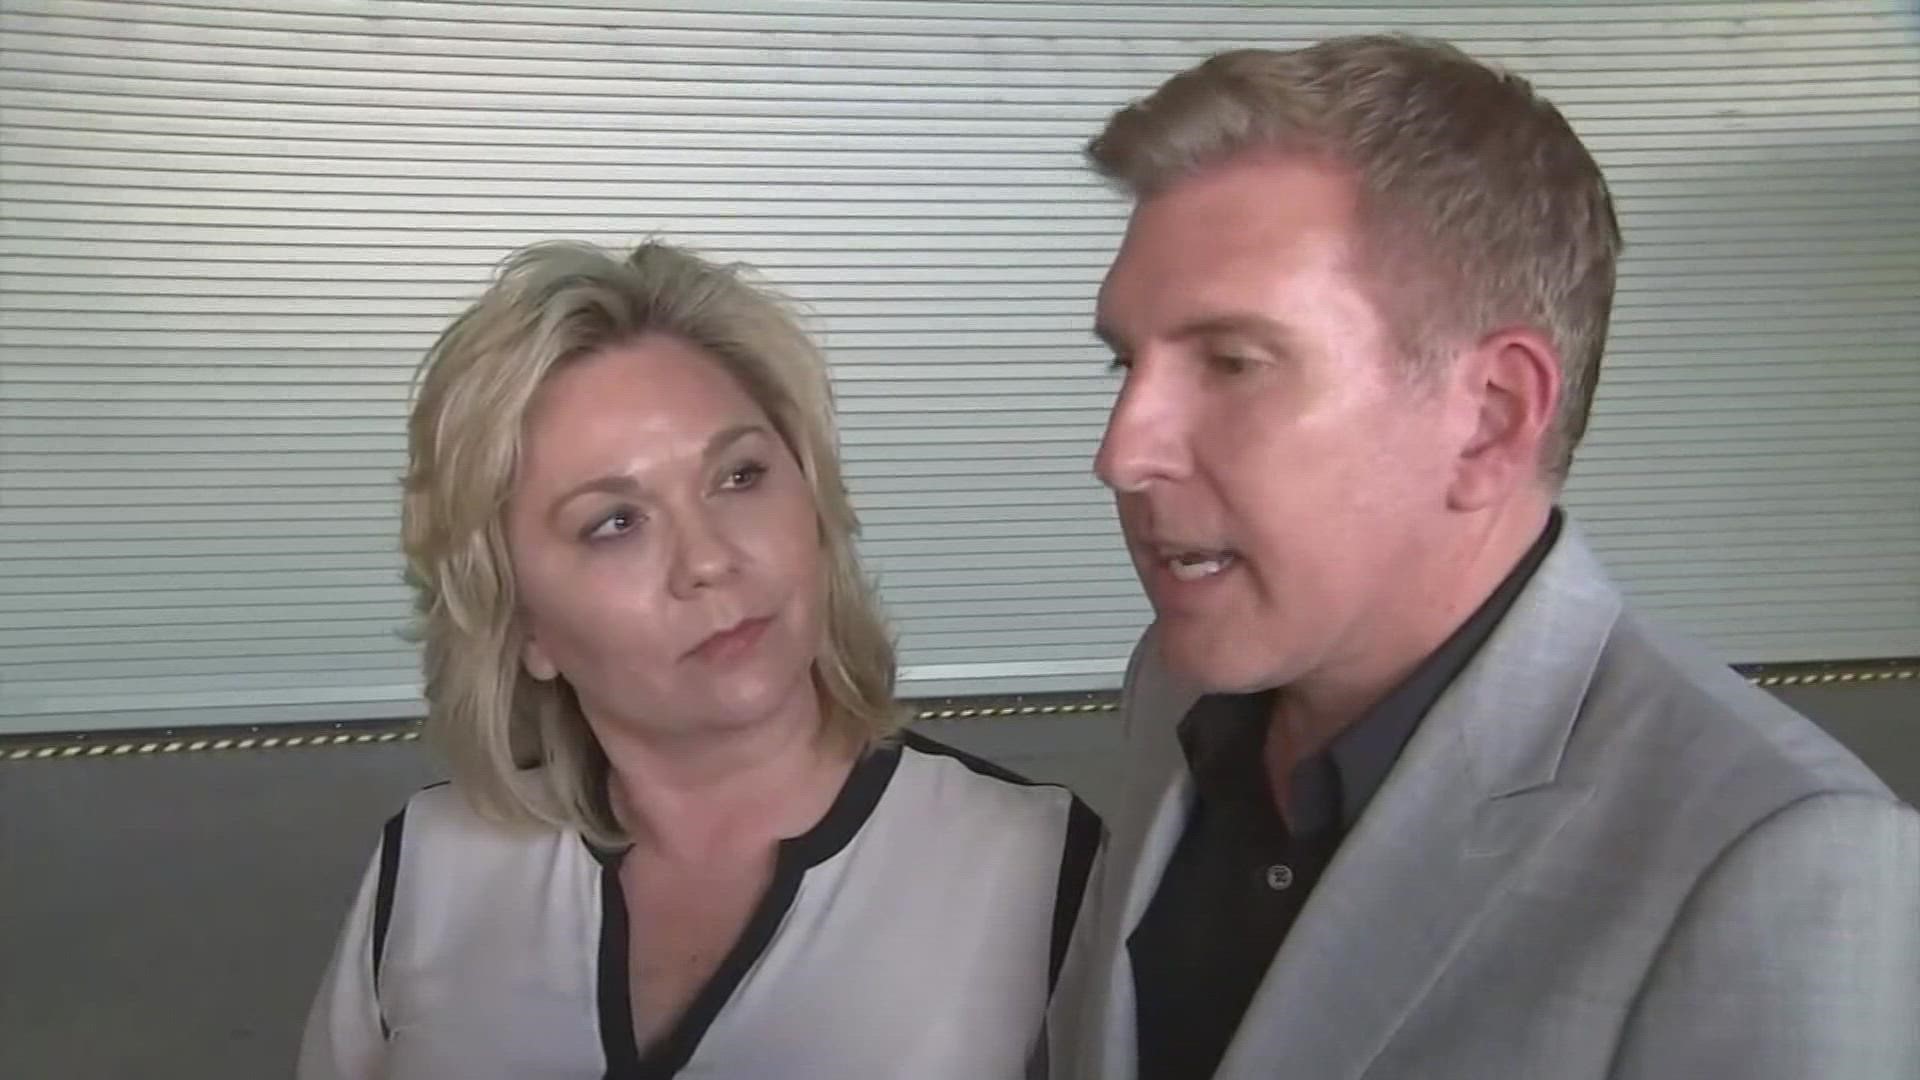 Prosecutors want up to 22 years for Todd Chrisley and about 12 and a half years for Julie Chrisley.